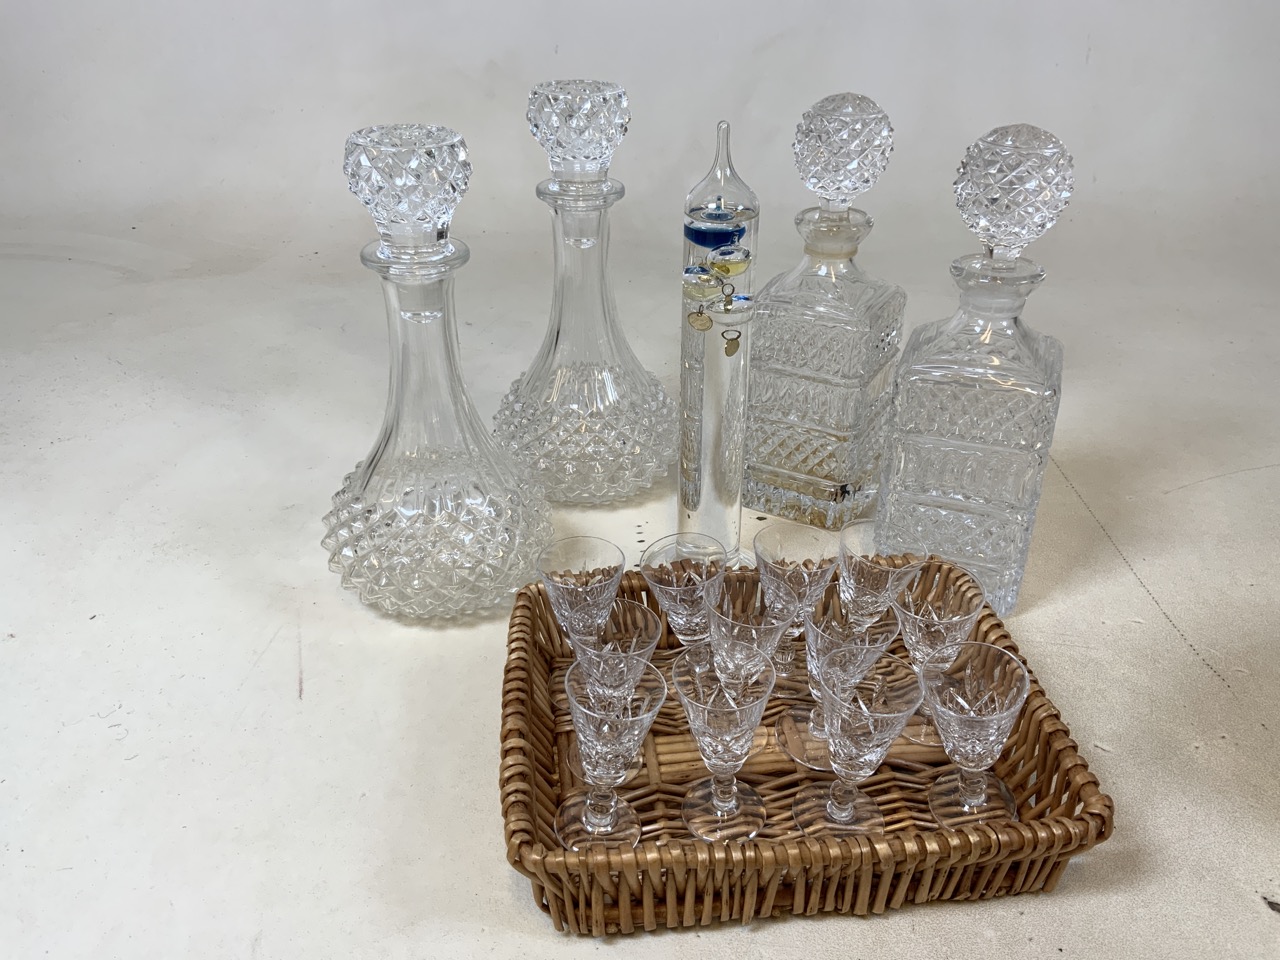 A quantity of glassware including 2 glass handbags, 4 decanters and other items - Image 3 of 6